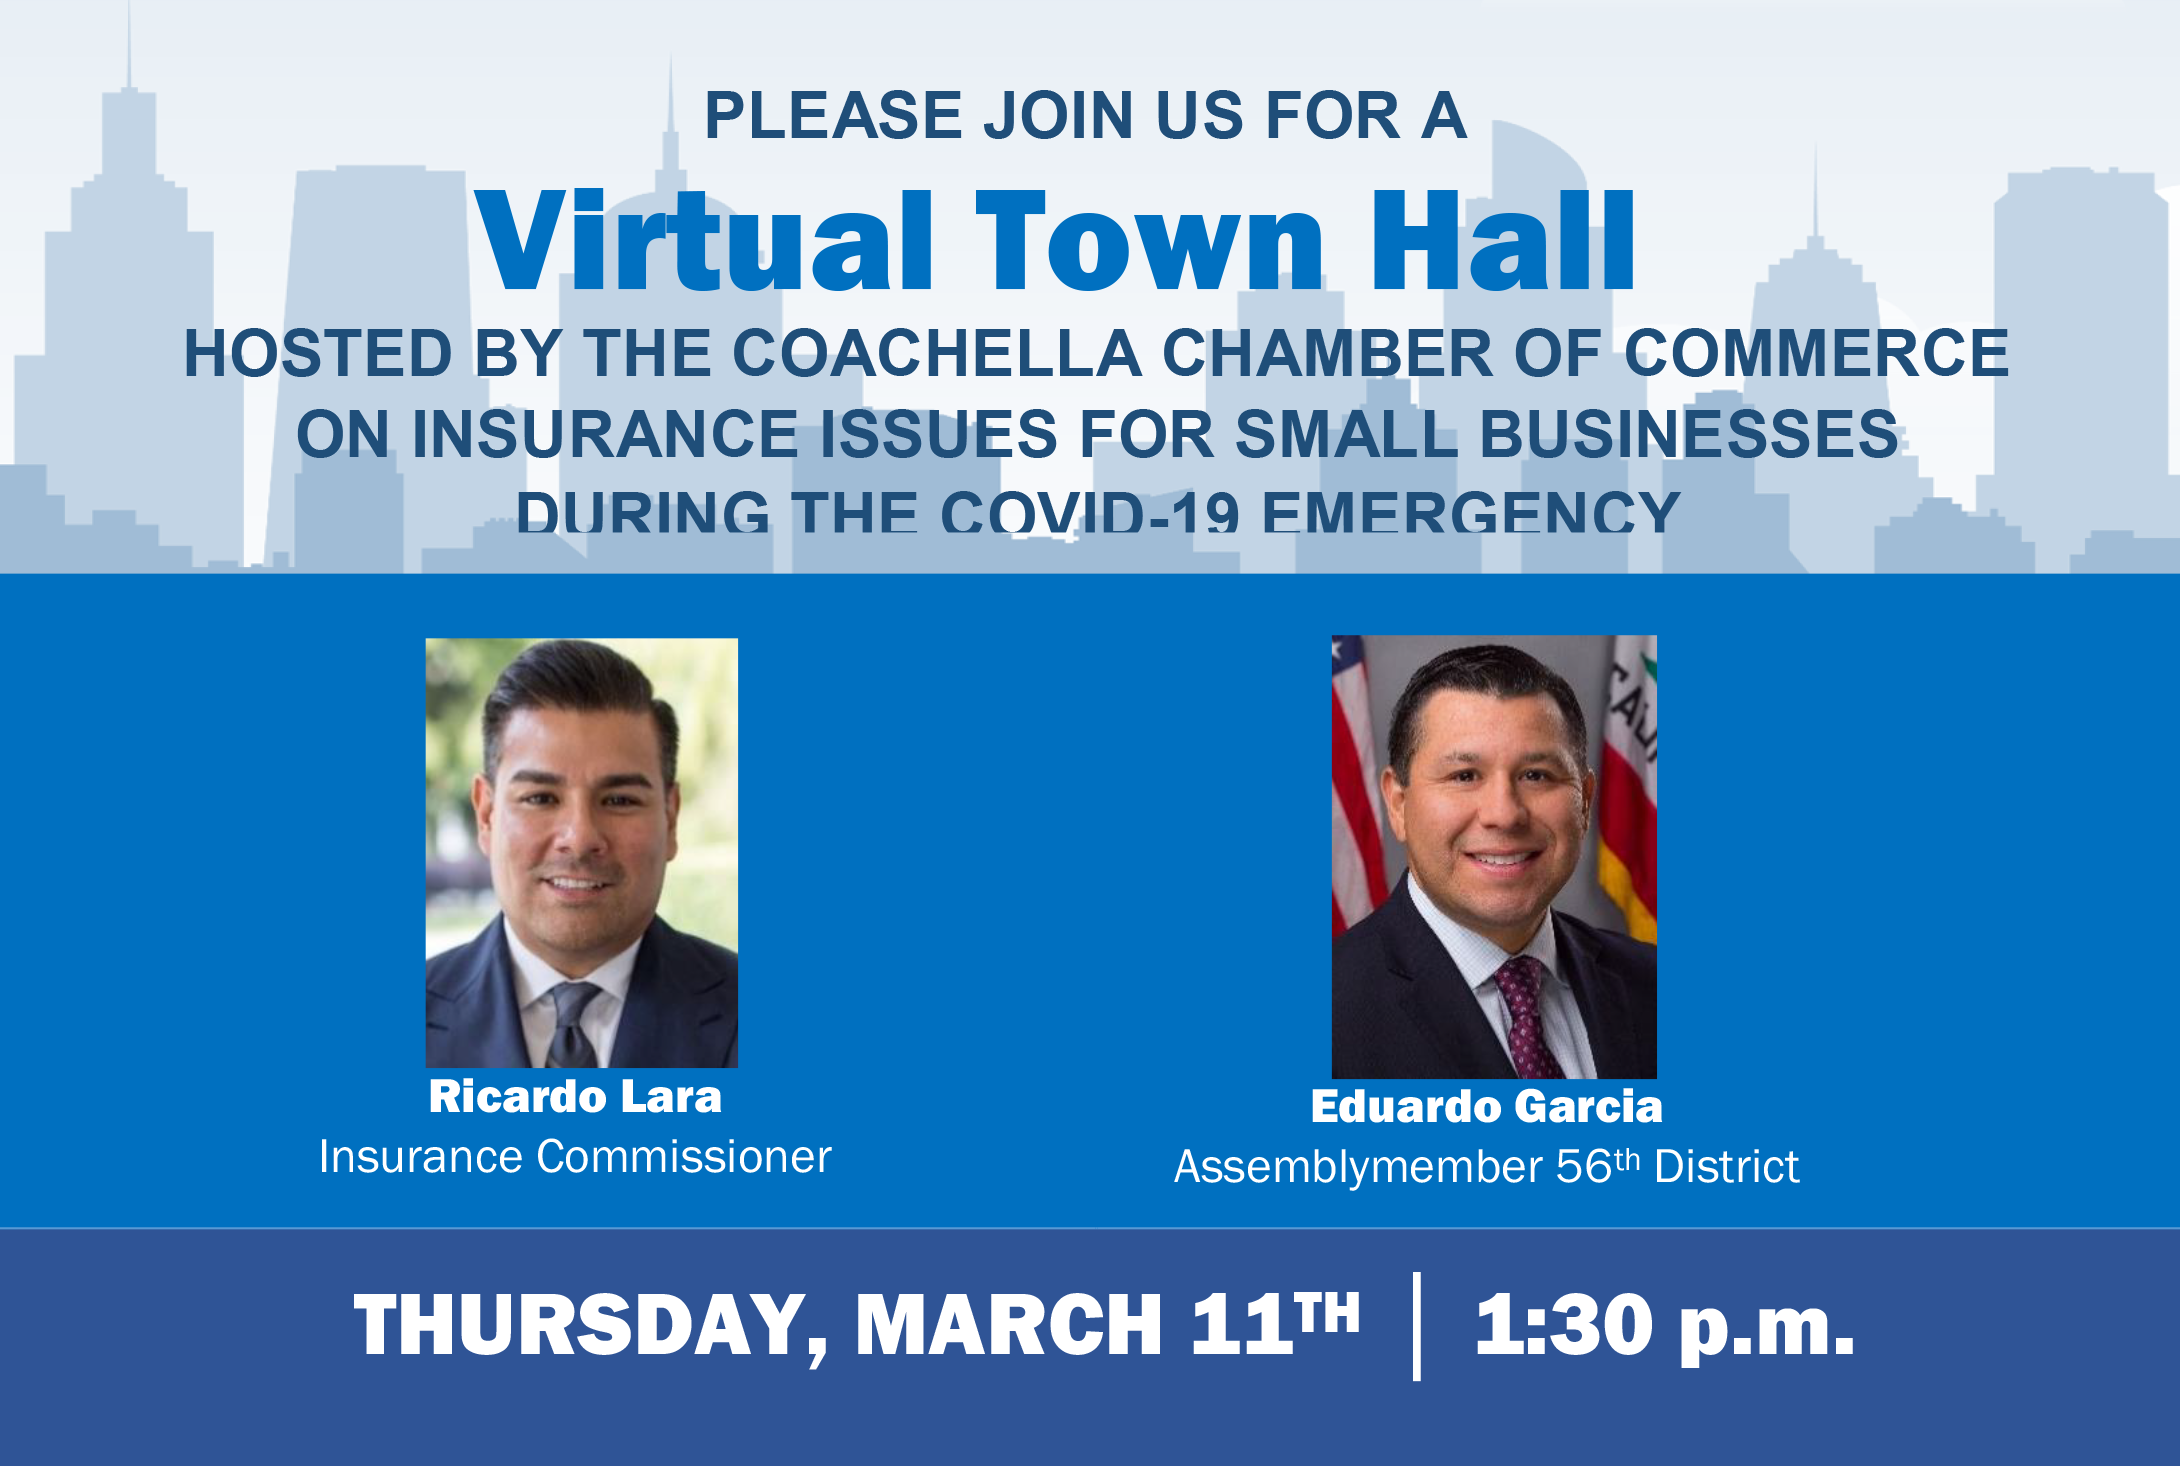 PLEASE JOIN US FOR A US FOR A VIRTUAL TOWN HALL HOSTED BY THE COACHELLA CHAMBER OF COMMERCE AND HOSTED BY ASSEMBLYMEMBER EDUARDO GARCIA AND INSURANCE COMMISSIONER RICARDO LARA ON MARCH 11TH AT 1:30PM